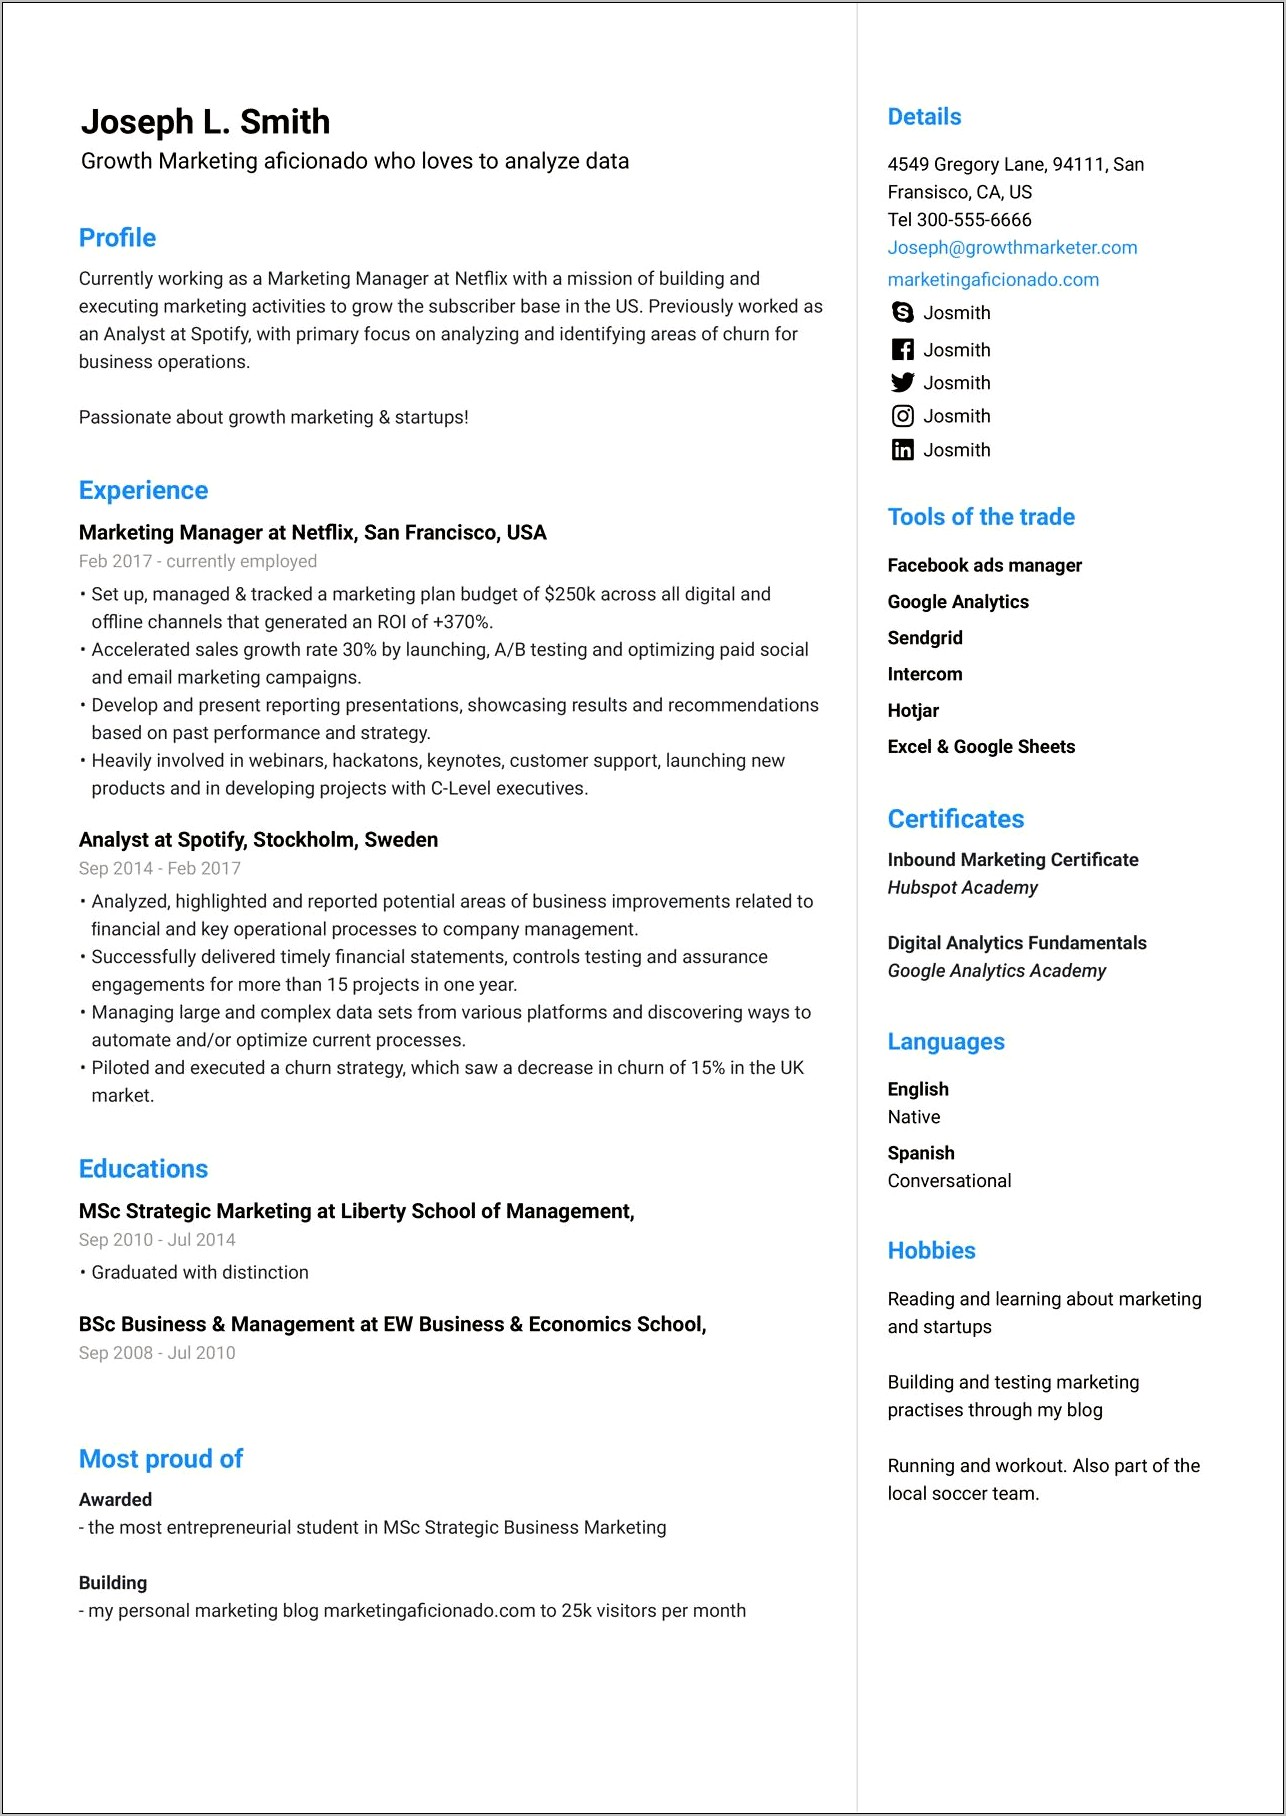 4 Years Experience Resume In Marketing